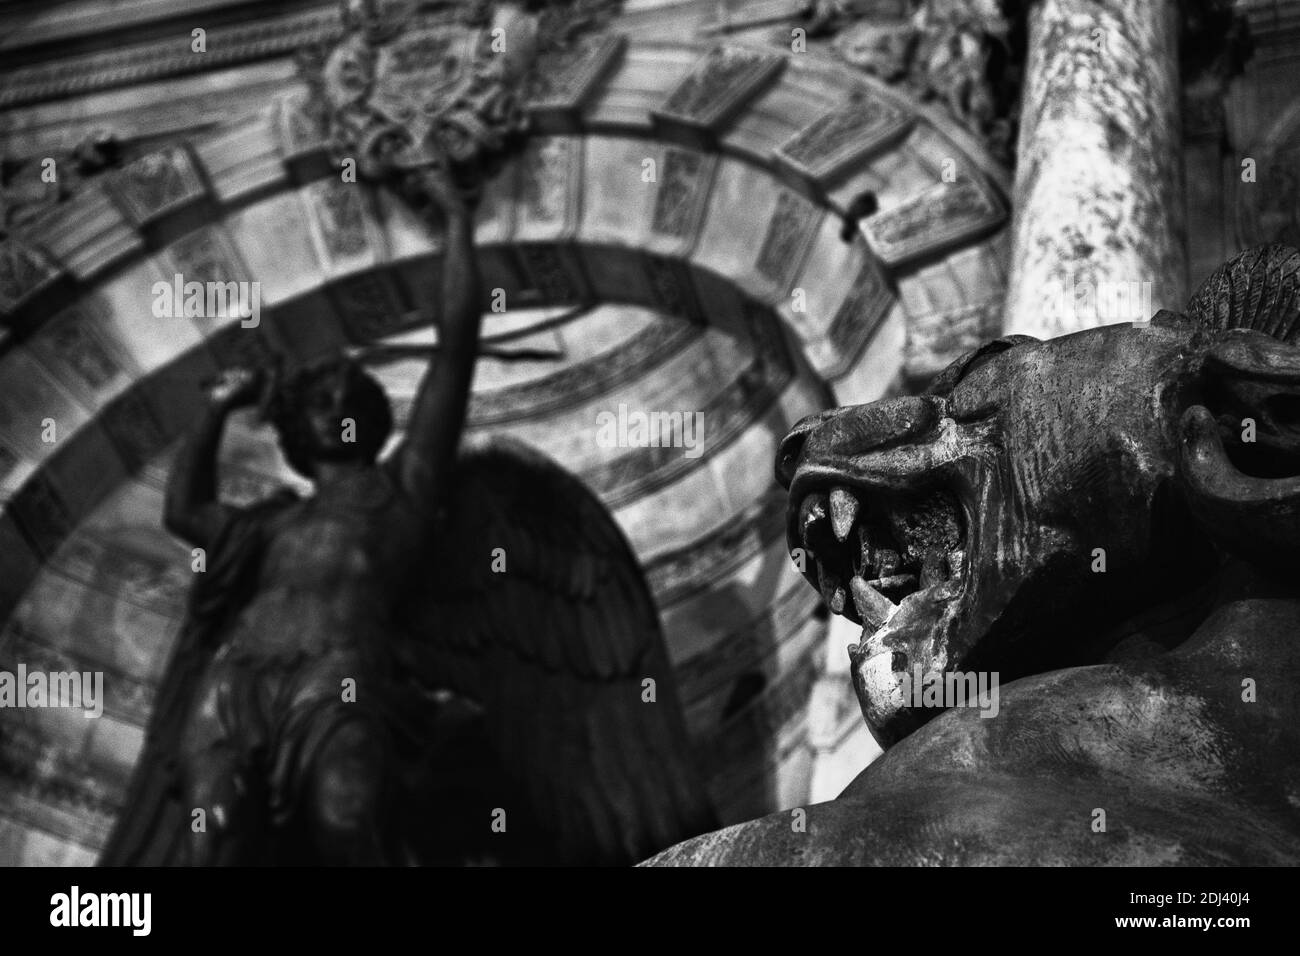 Night Fight. Saint-Michel fountain at Paris, France. Dragon and Archangel Michael at background slaying the devil. Black and white photo. Stock Photo